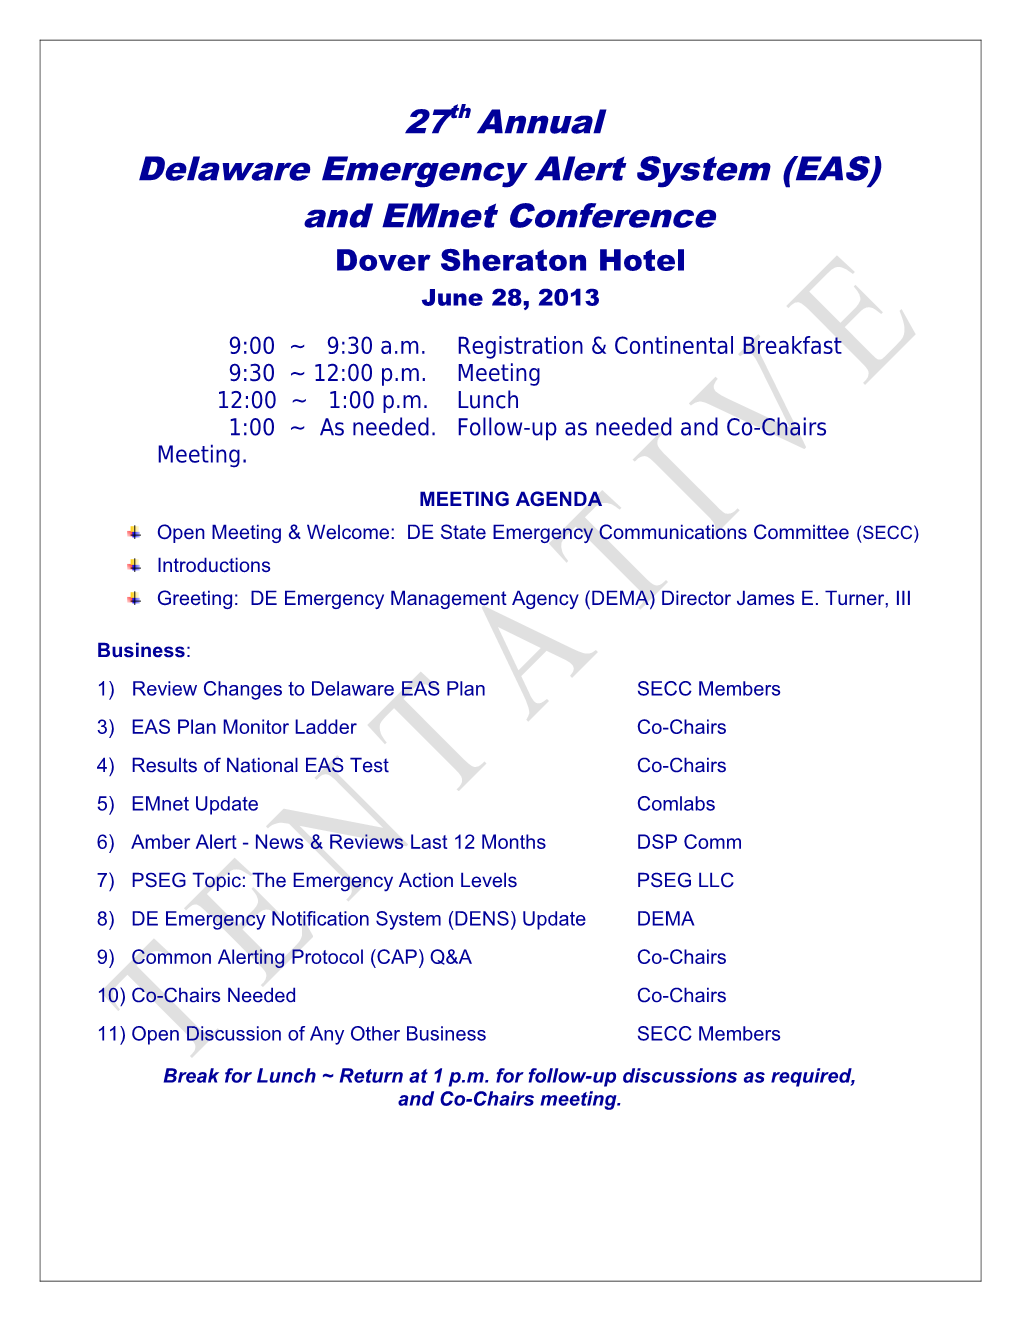 19Th Annual Delaware EAS/Emnet Conference